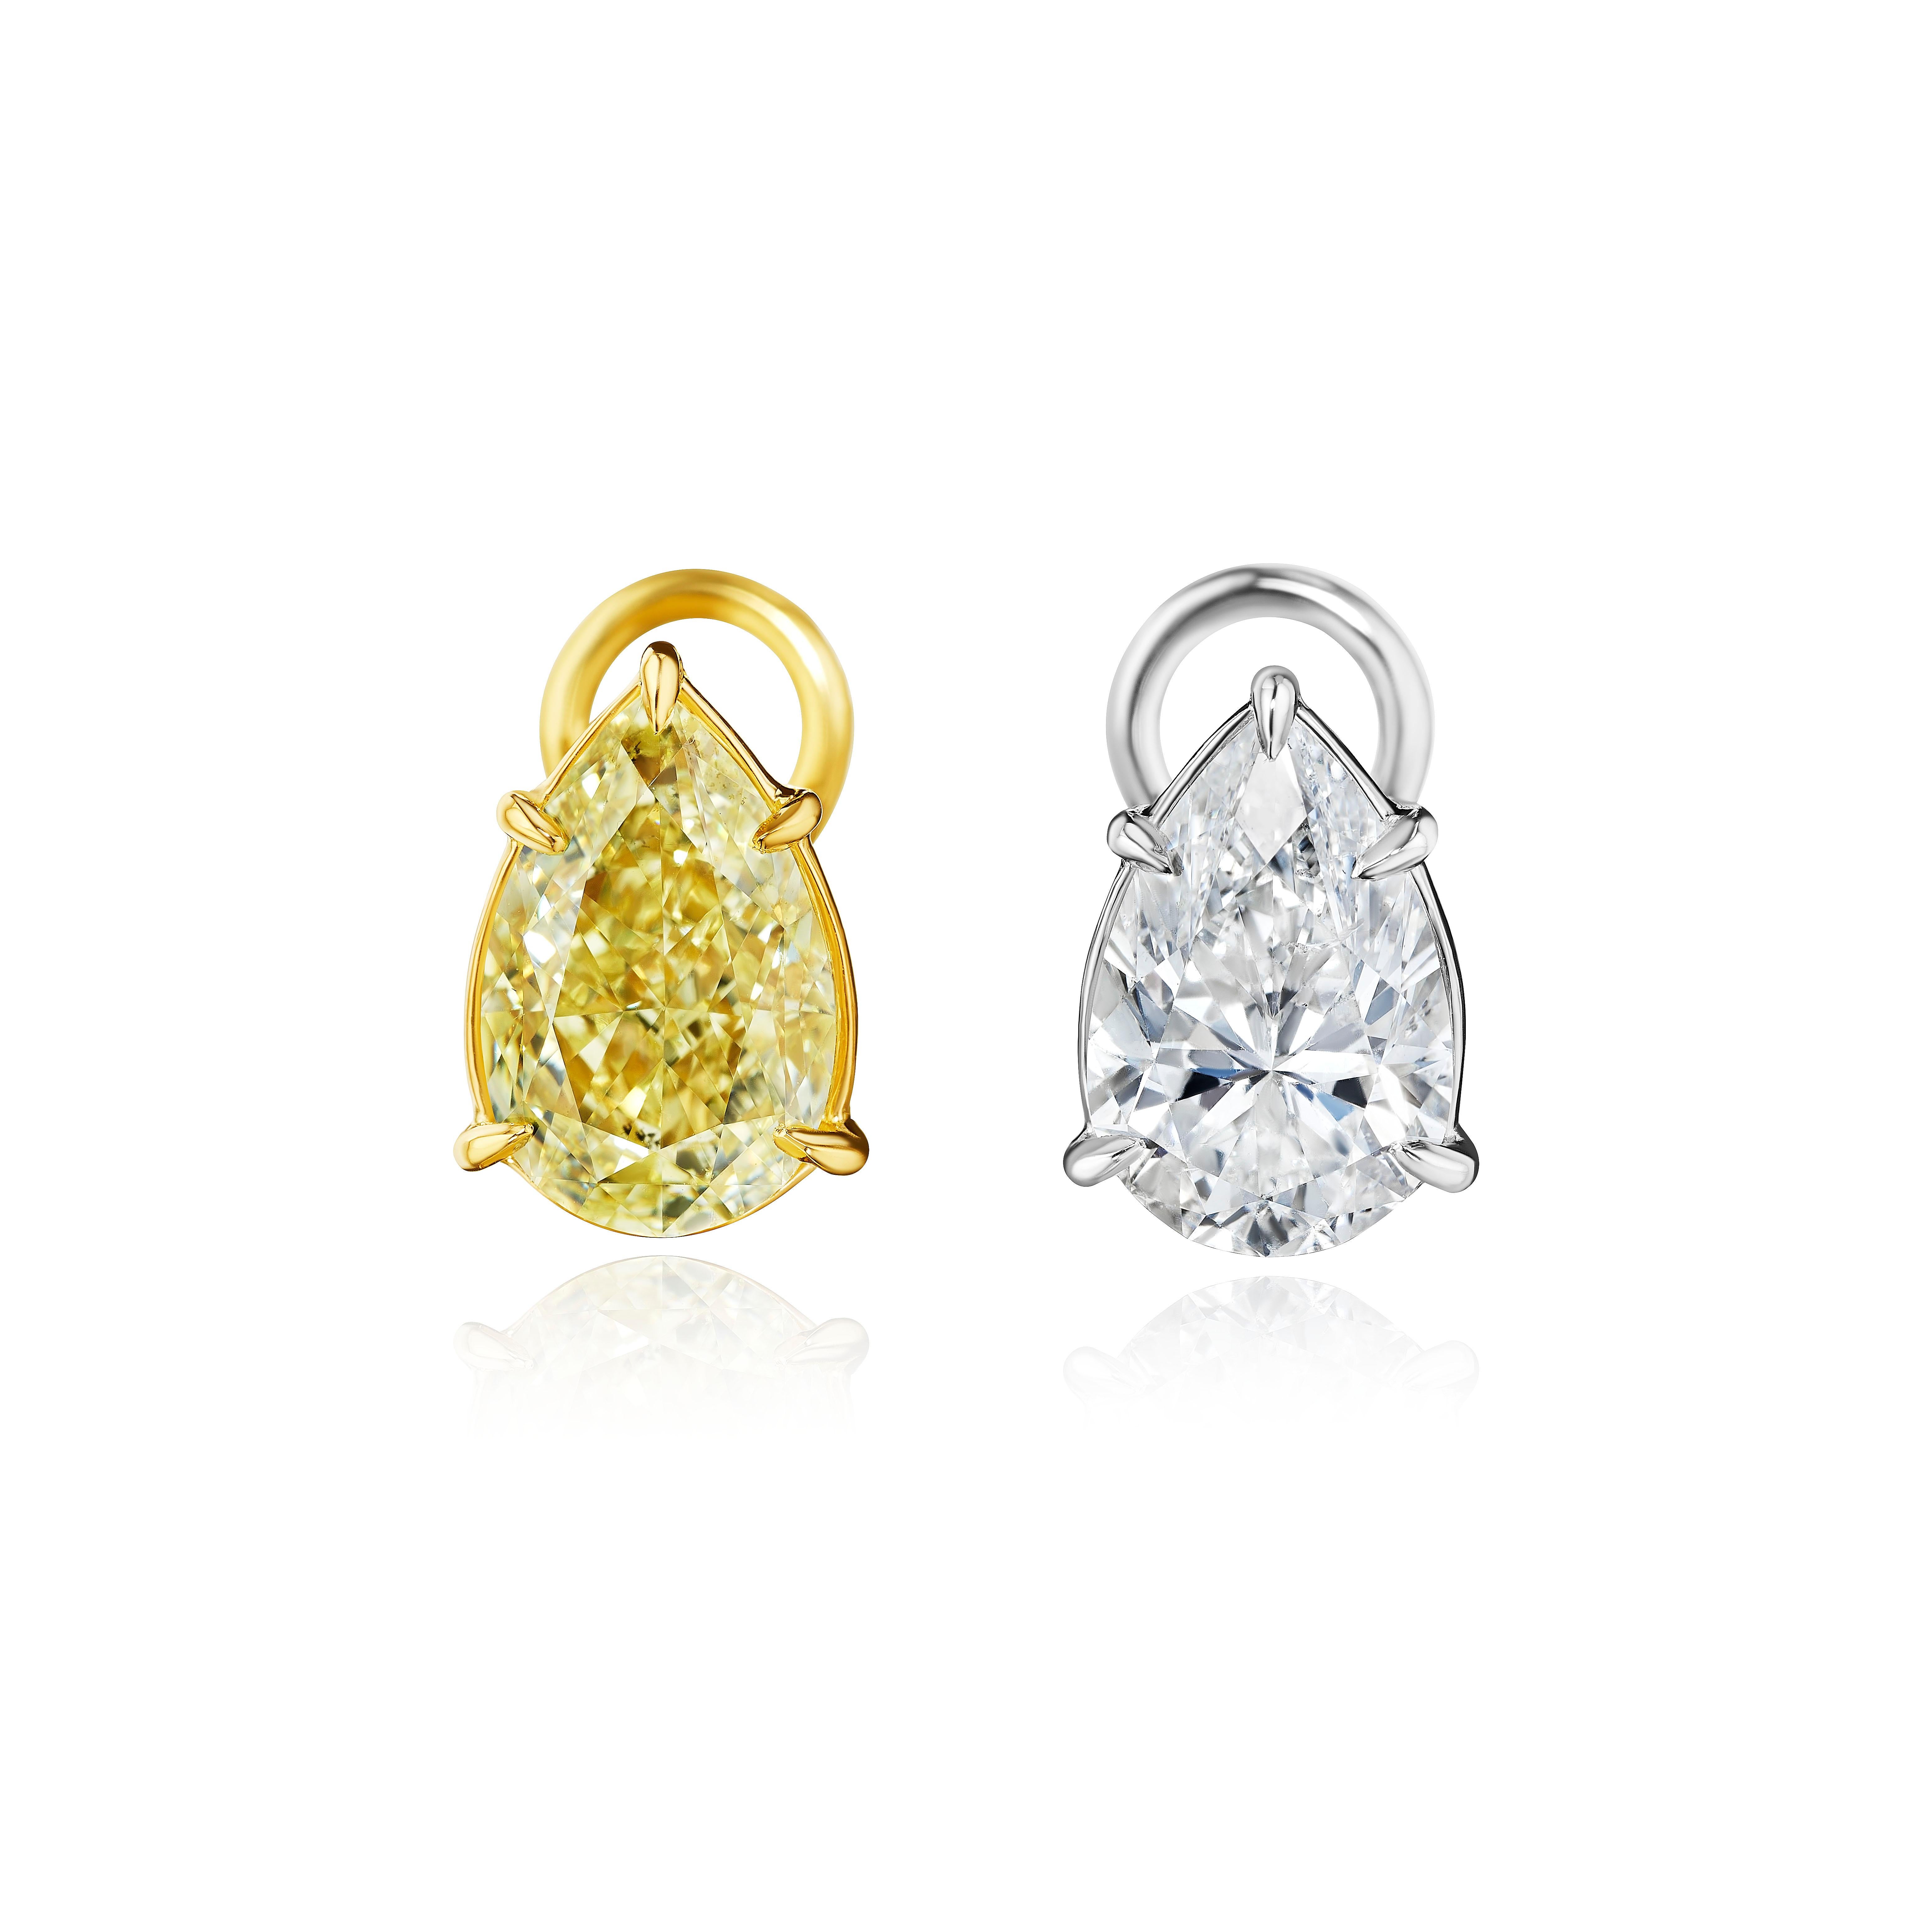 Beautiful Earring featuring a 3 Carat Fancy Light Yellow Diamond and a 2.5 Carat White Diamond.

All Stones will be GIA Certified. Set in Platinum and 18 Karat Yellow Gold.
